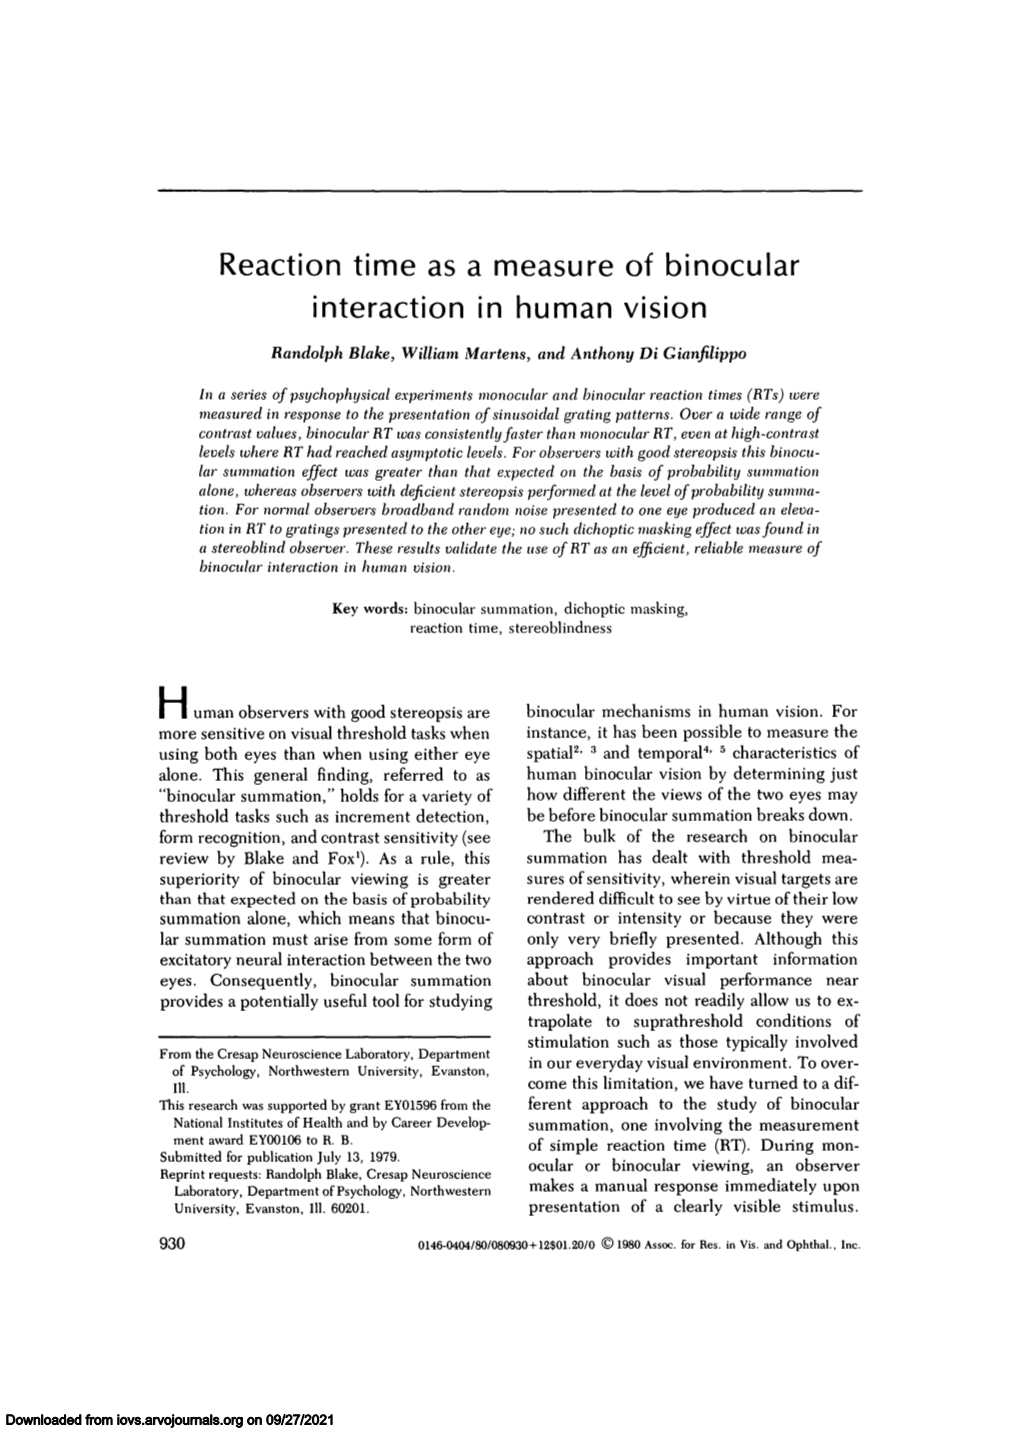 Reaction Time As a Measure of Binocular Interaction in Human Vision